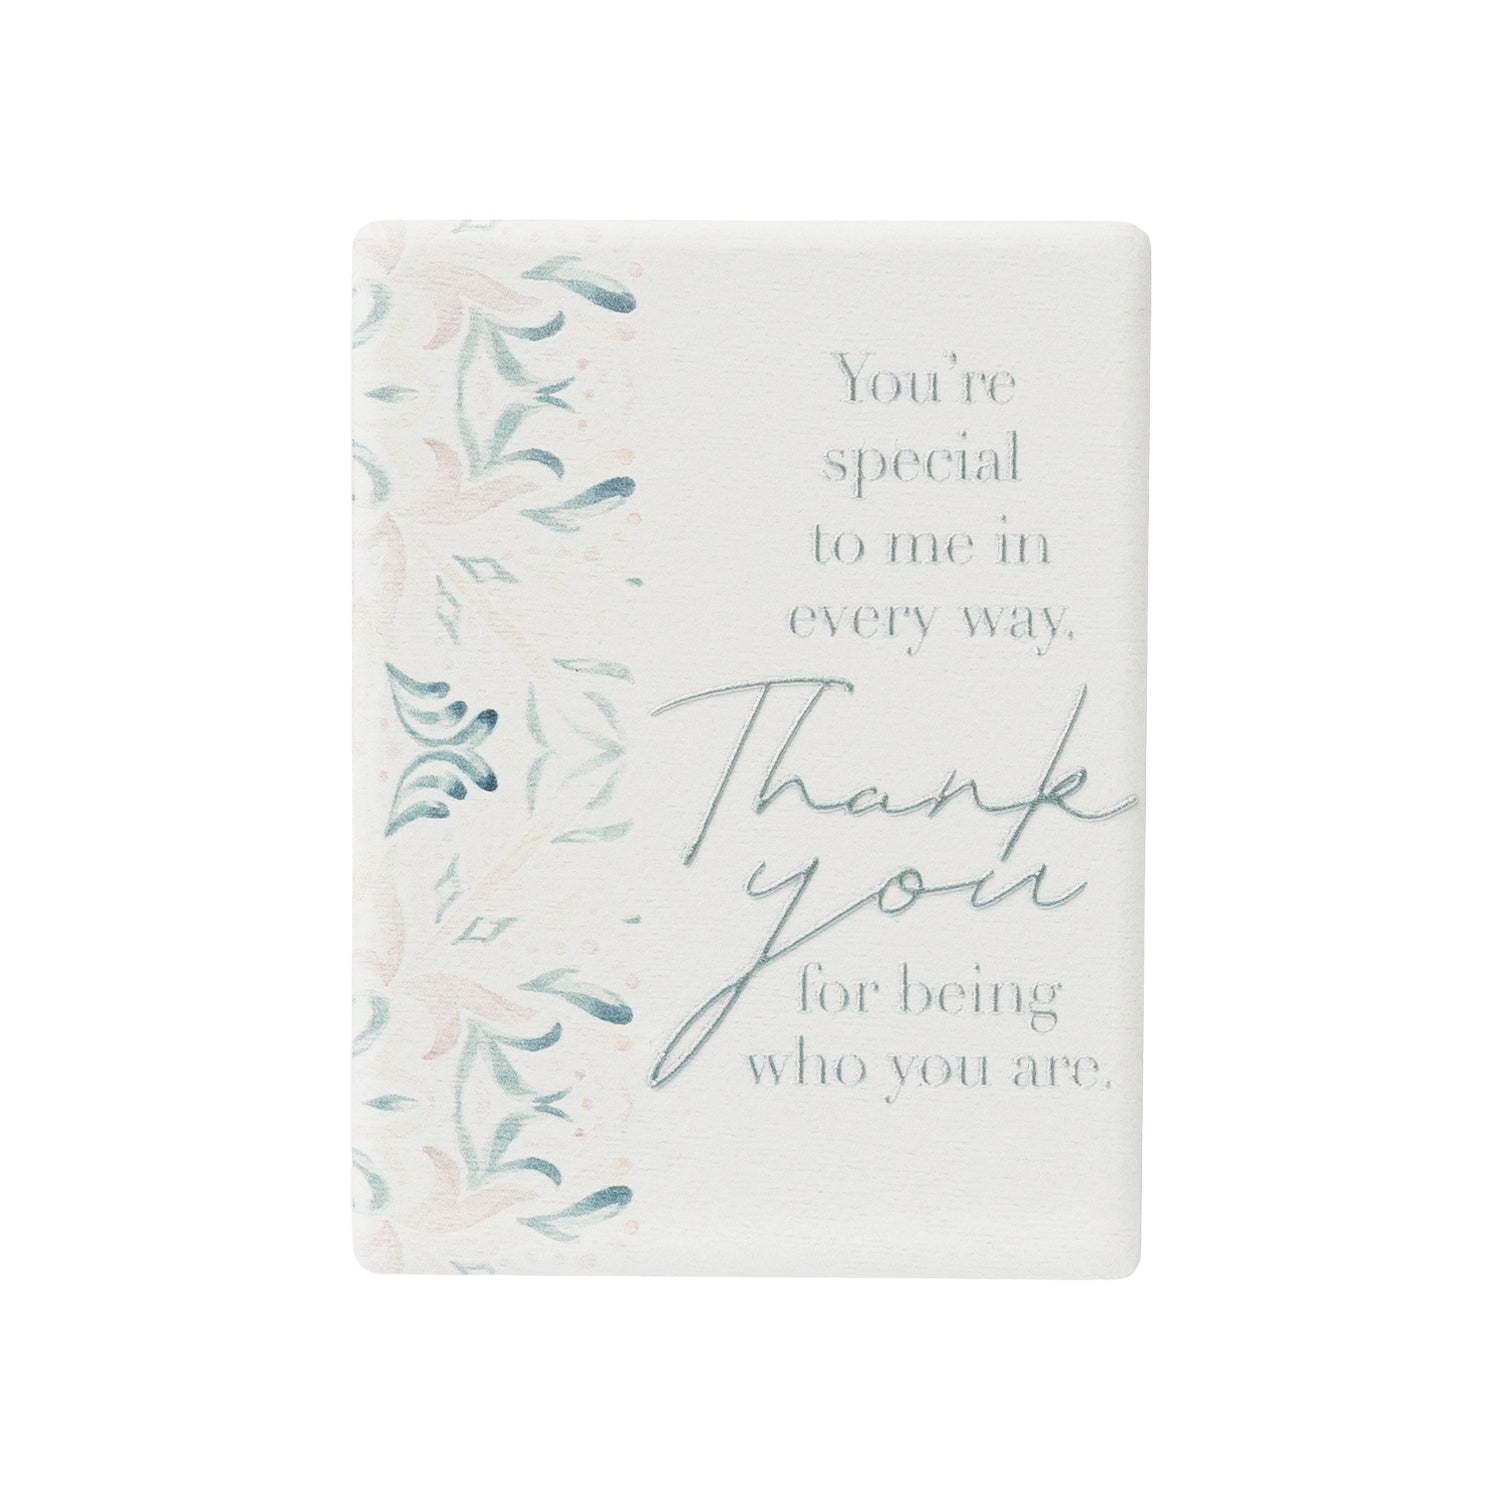 Printed and embossed ceramic magnet with "thank you" verse